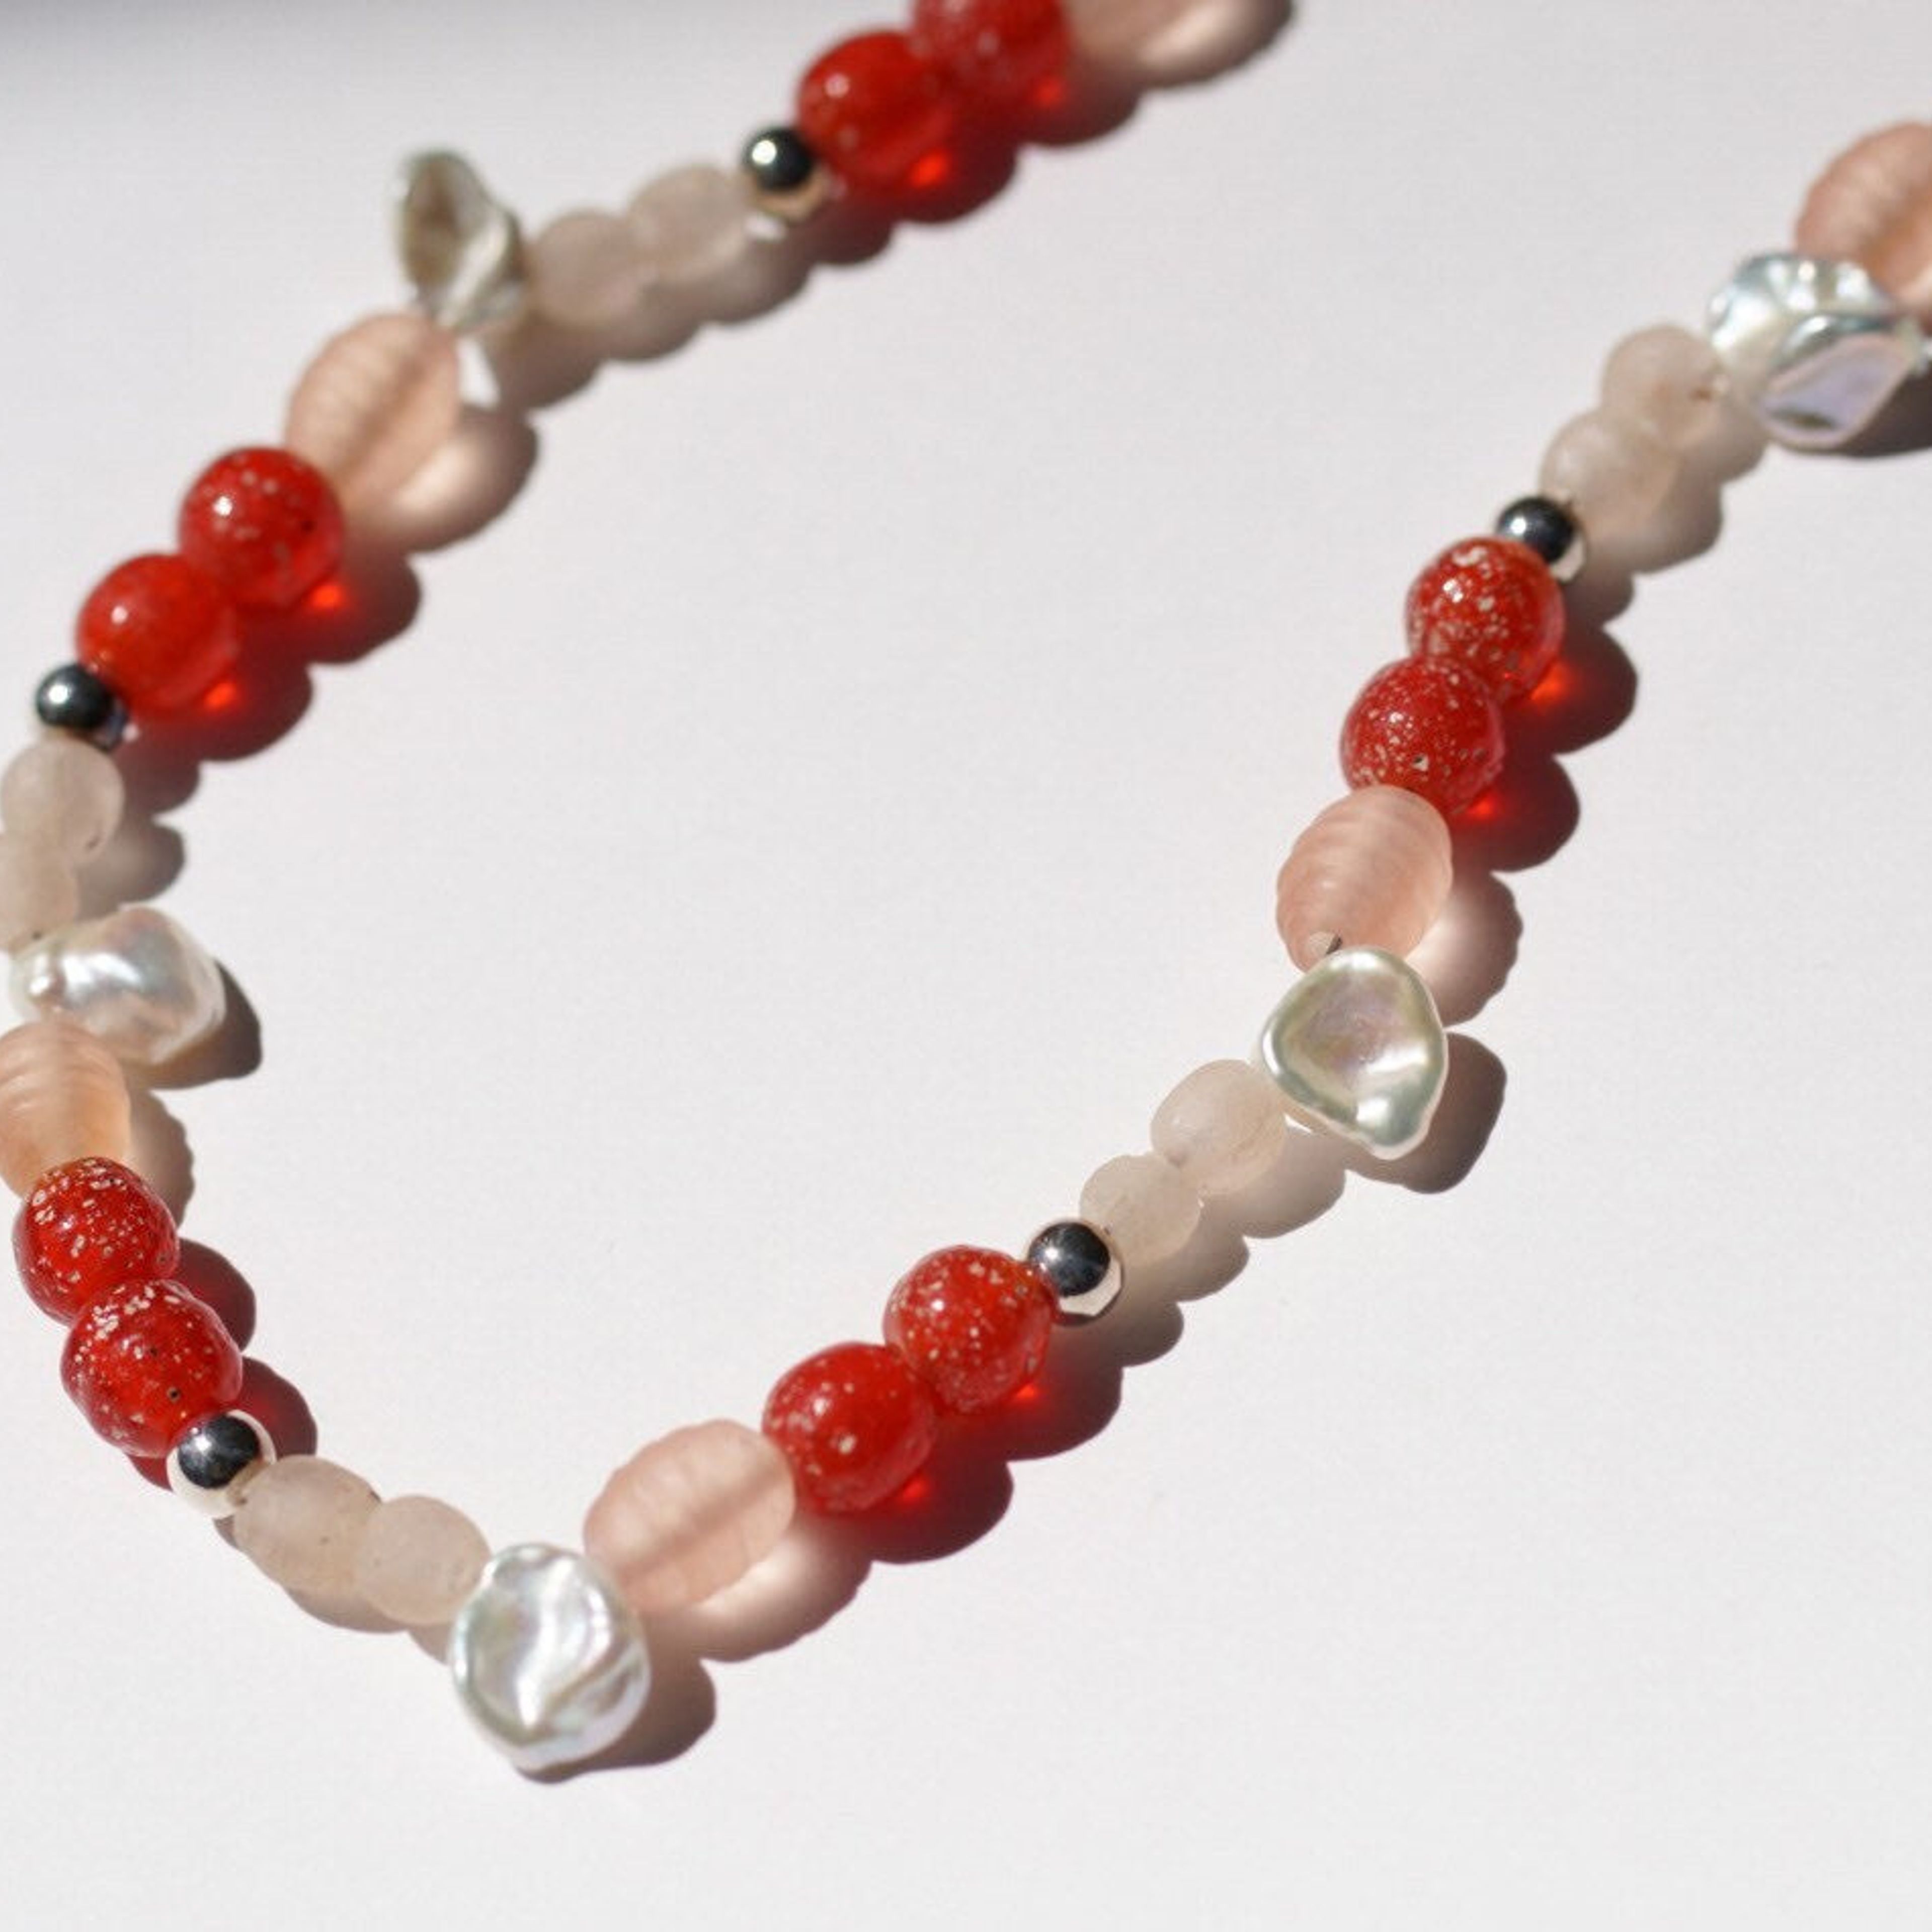 Light Pink & Red Beaded Necklace - Rojo